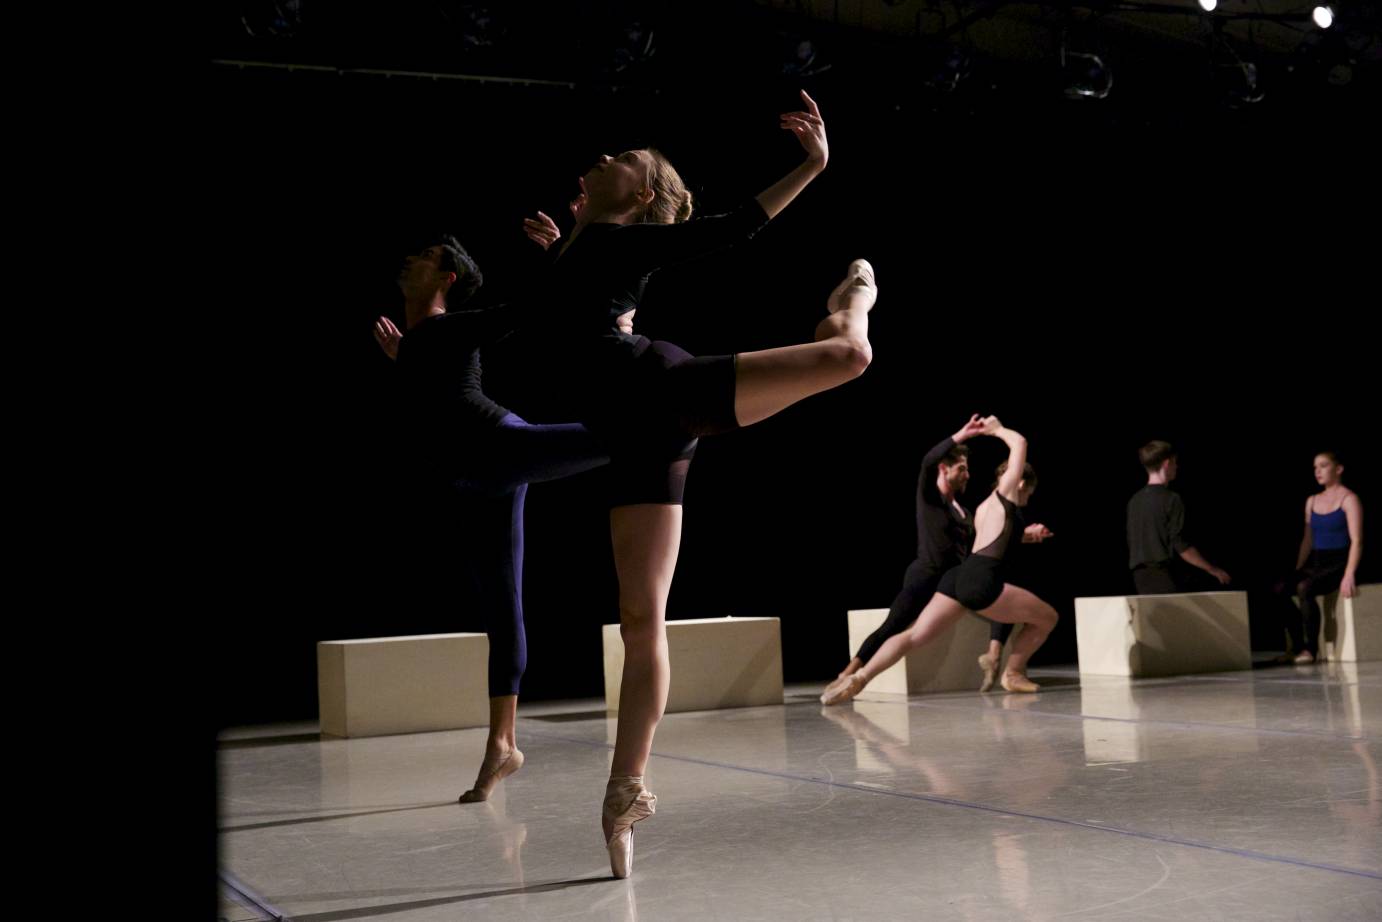 Two people pose in attitude in relve on one side of the side while other dancers lunge and sit in the background.